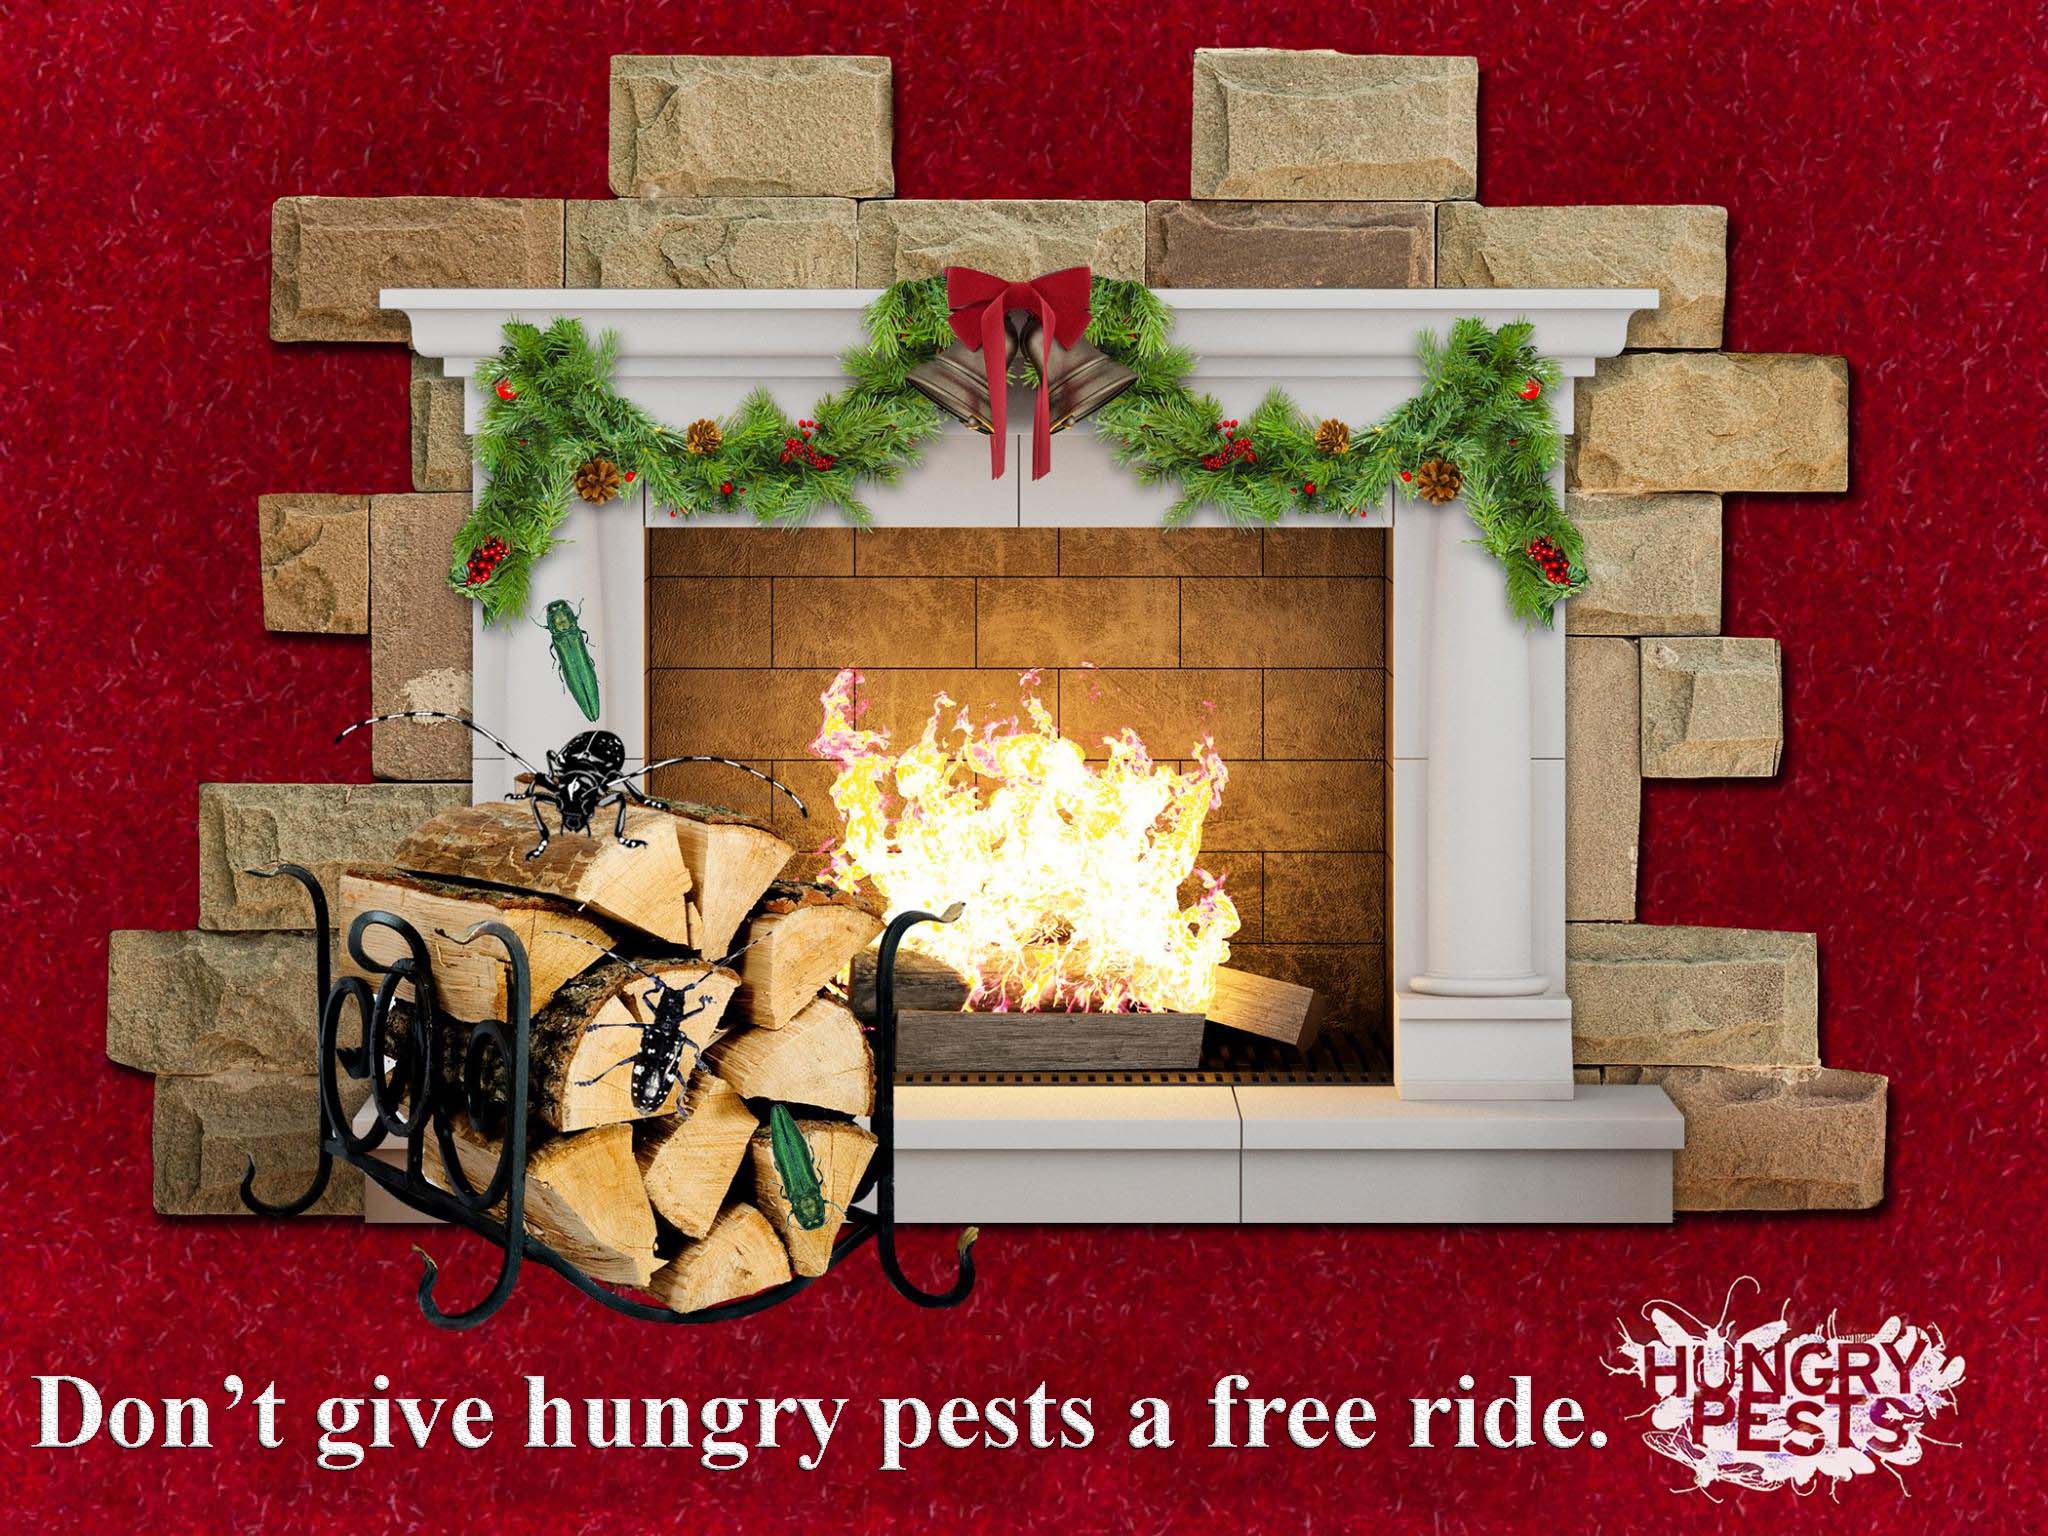 A graphic depiction of a fireplace adorned for the holidays next to firewood. Invasive pests are crawling out of the logs. The text on the graphic reads “don’t give hungry pests a free ride.”